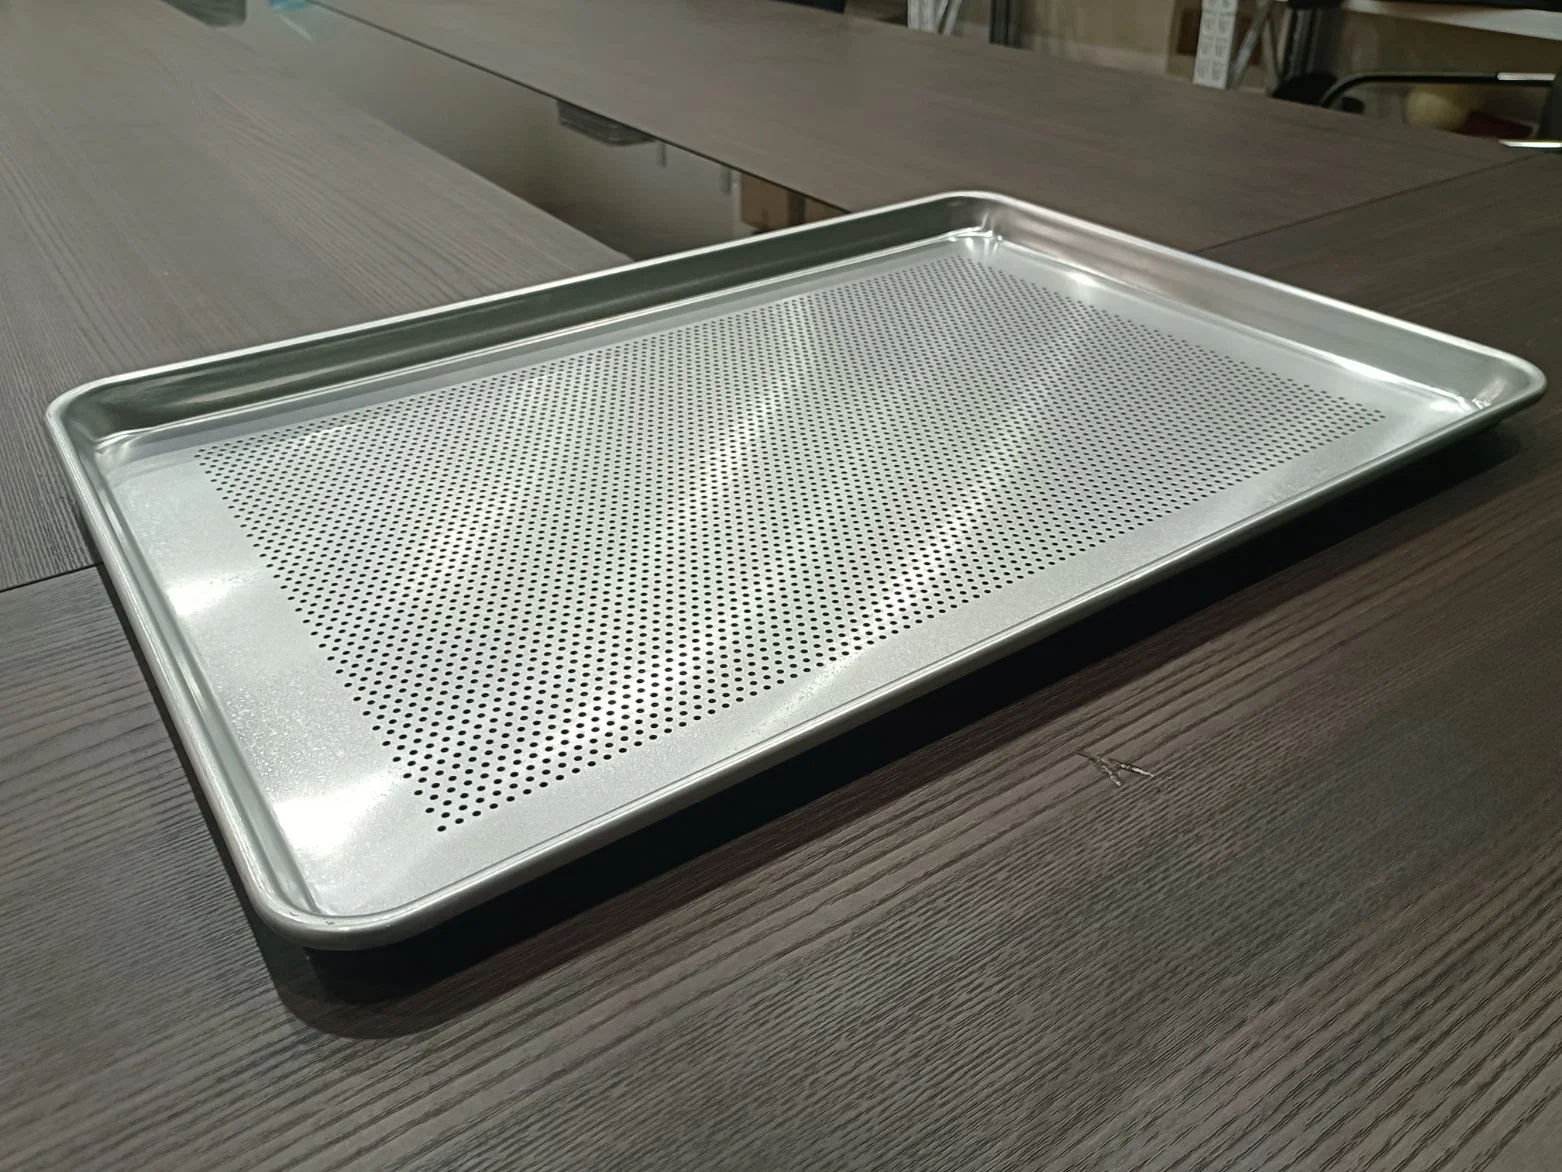 Rk Bakeware China Nonstick Aluminum Stainless Steel Muffin Baking Tray Cake Tray Cupcake Tray Brownie Tray Baguette Tray Burger Bun Tray Hotdog Tray Perforated